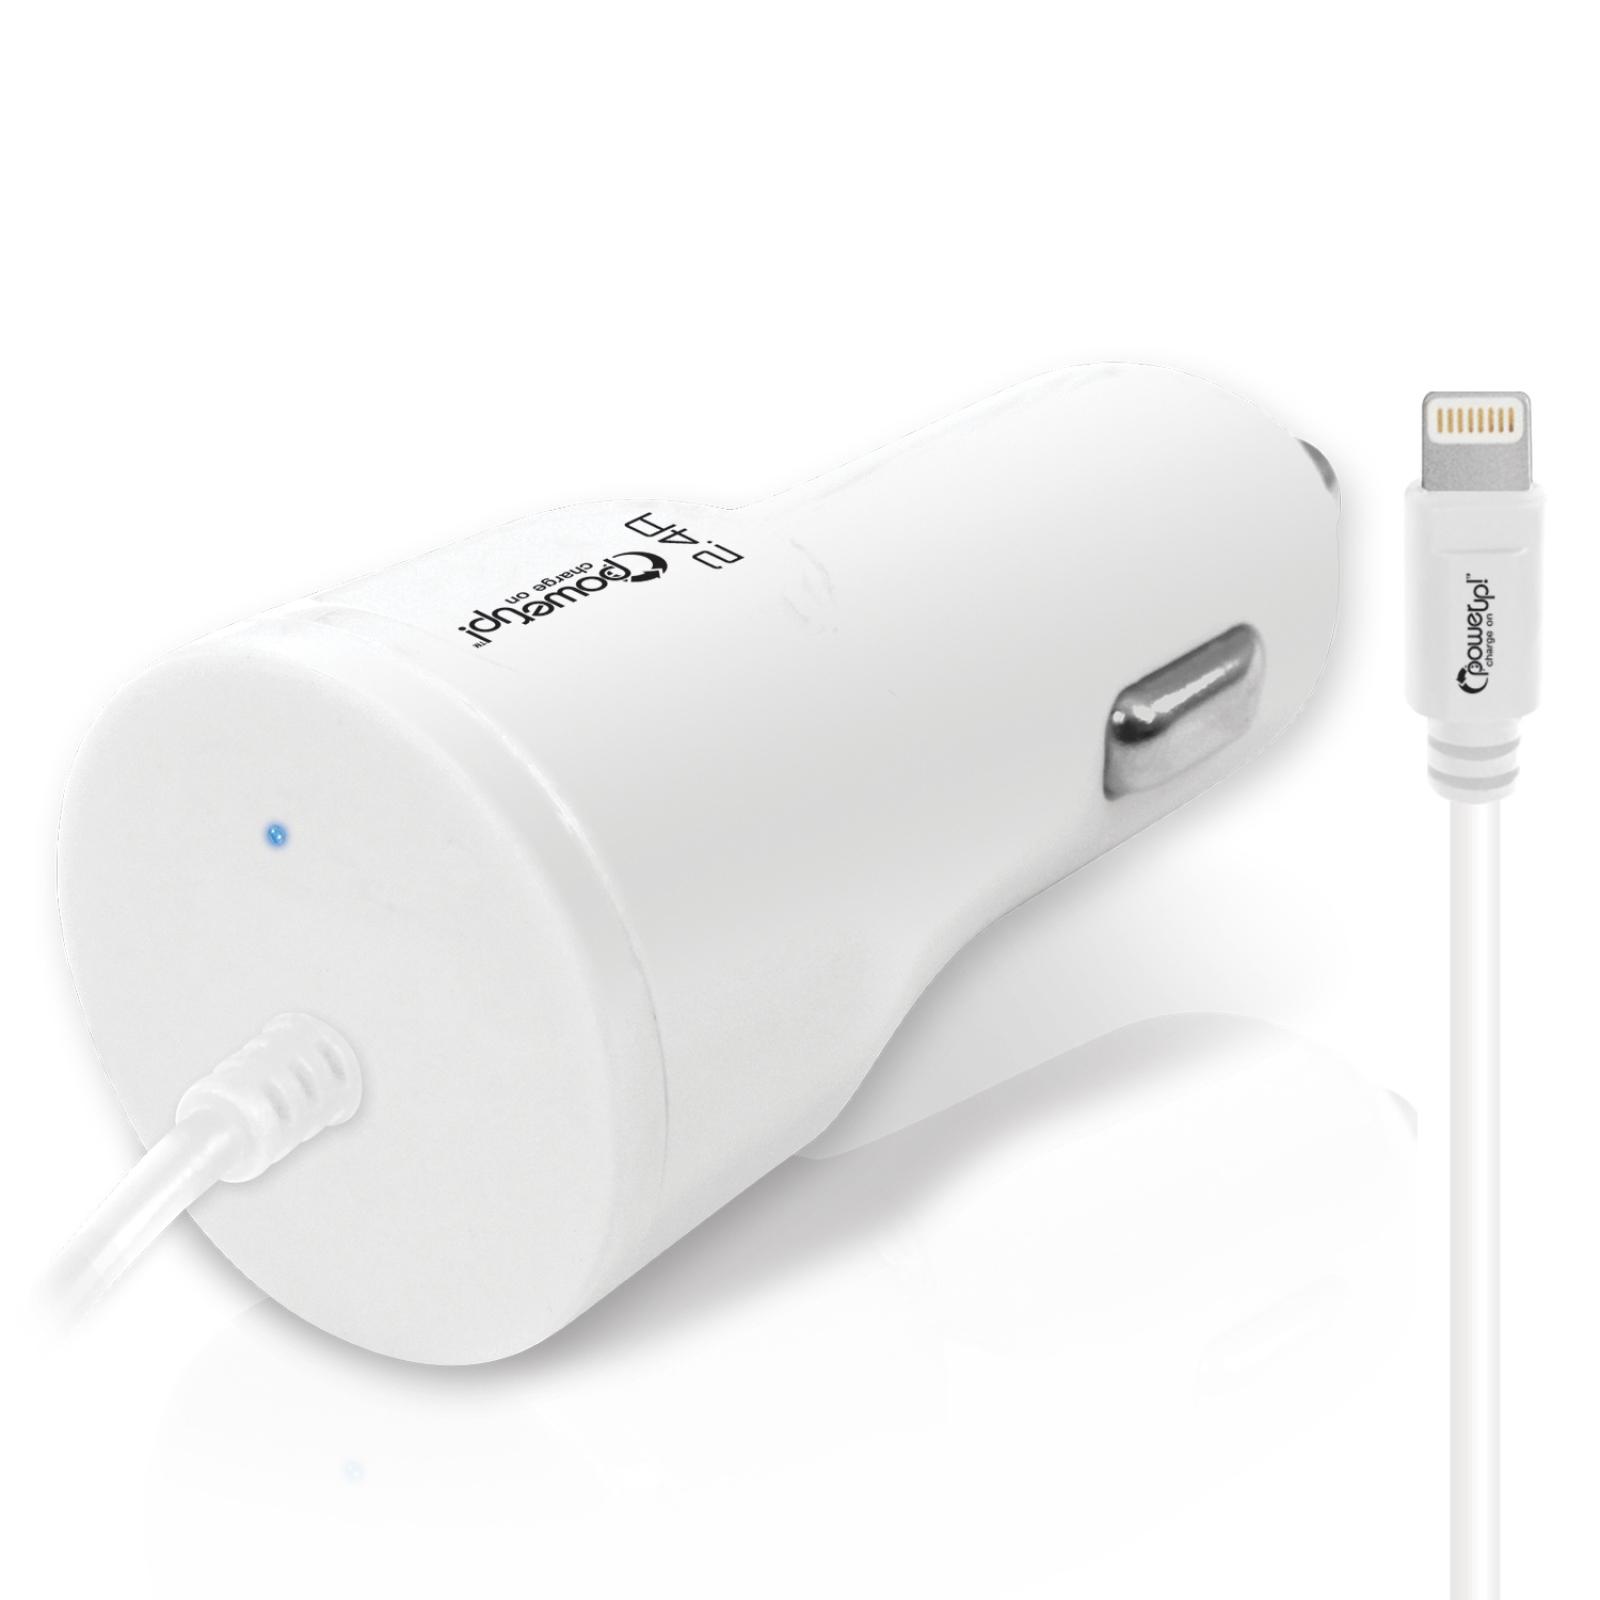 PowerUp! Charge On™ MFI Apple Lightning™ USB 2.4A Car Charger